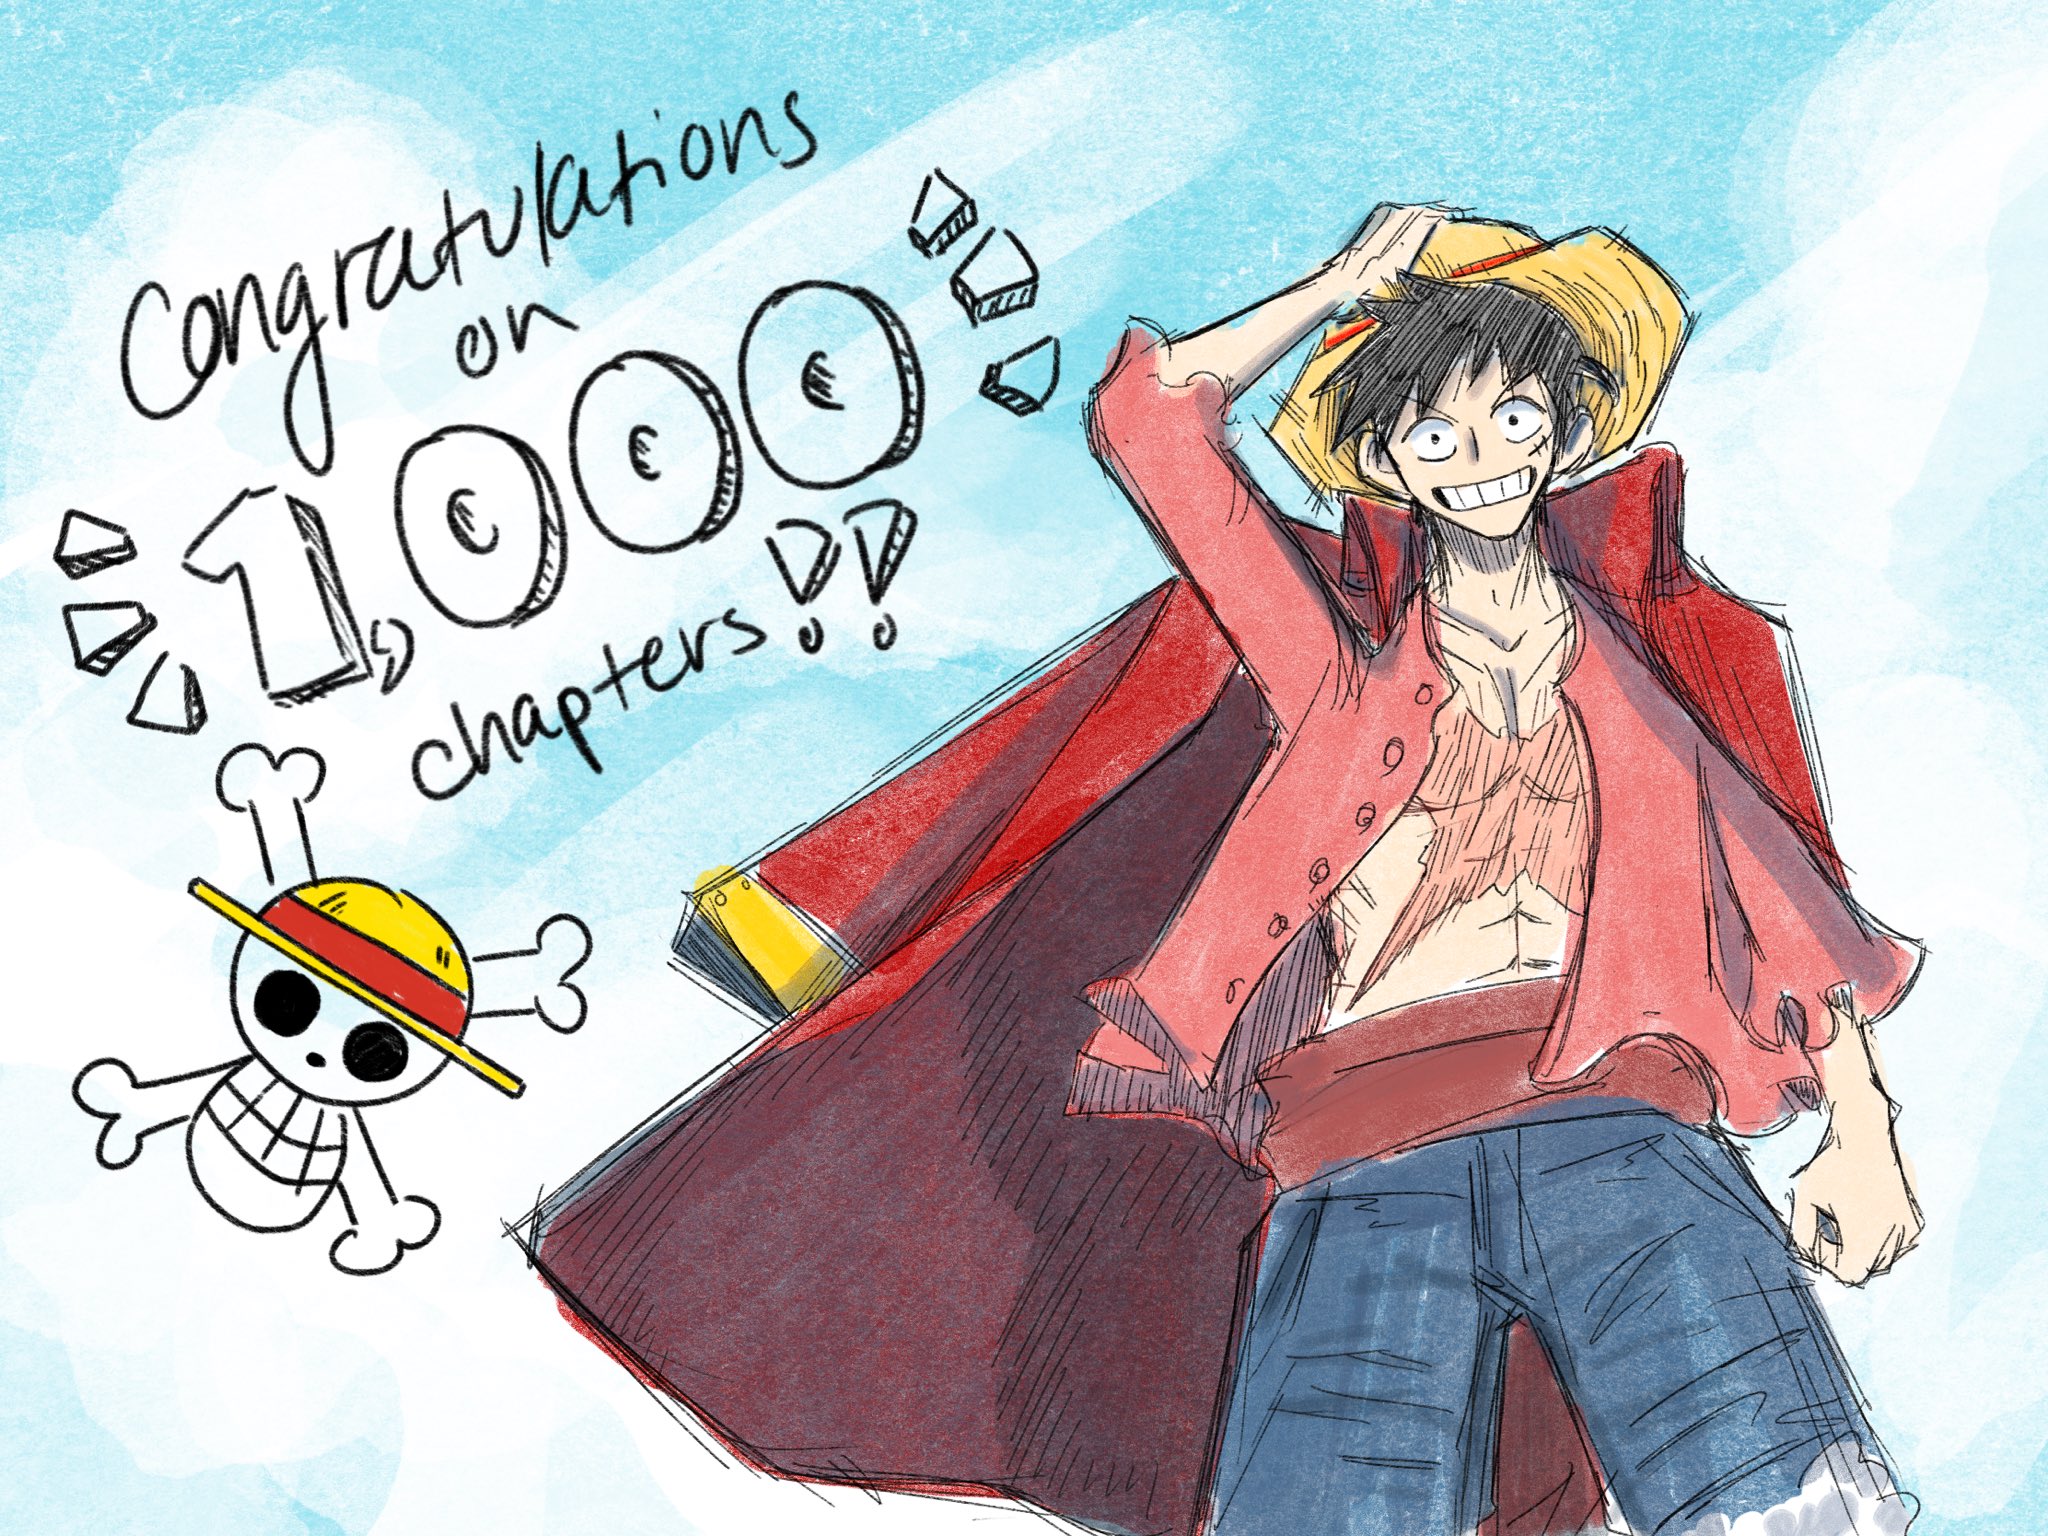 Ranty One Piece Is So Incredibly Important To Me Congrats On 1000 Chapters ワンピース ワンピース1000話 Onepiece1000 T Co Cedk8pos0t Twitter